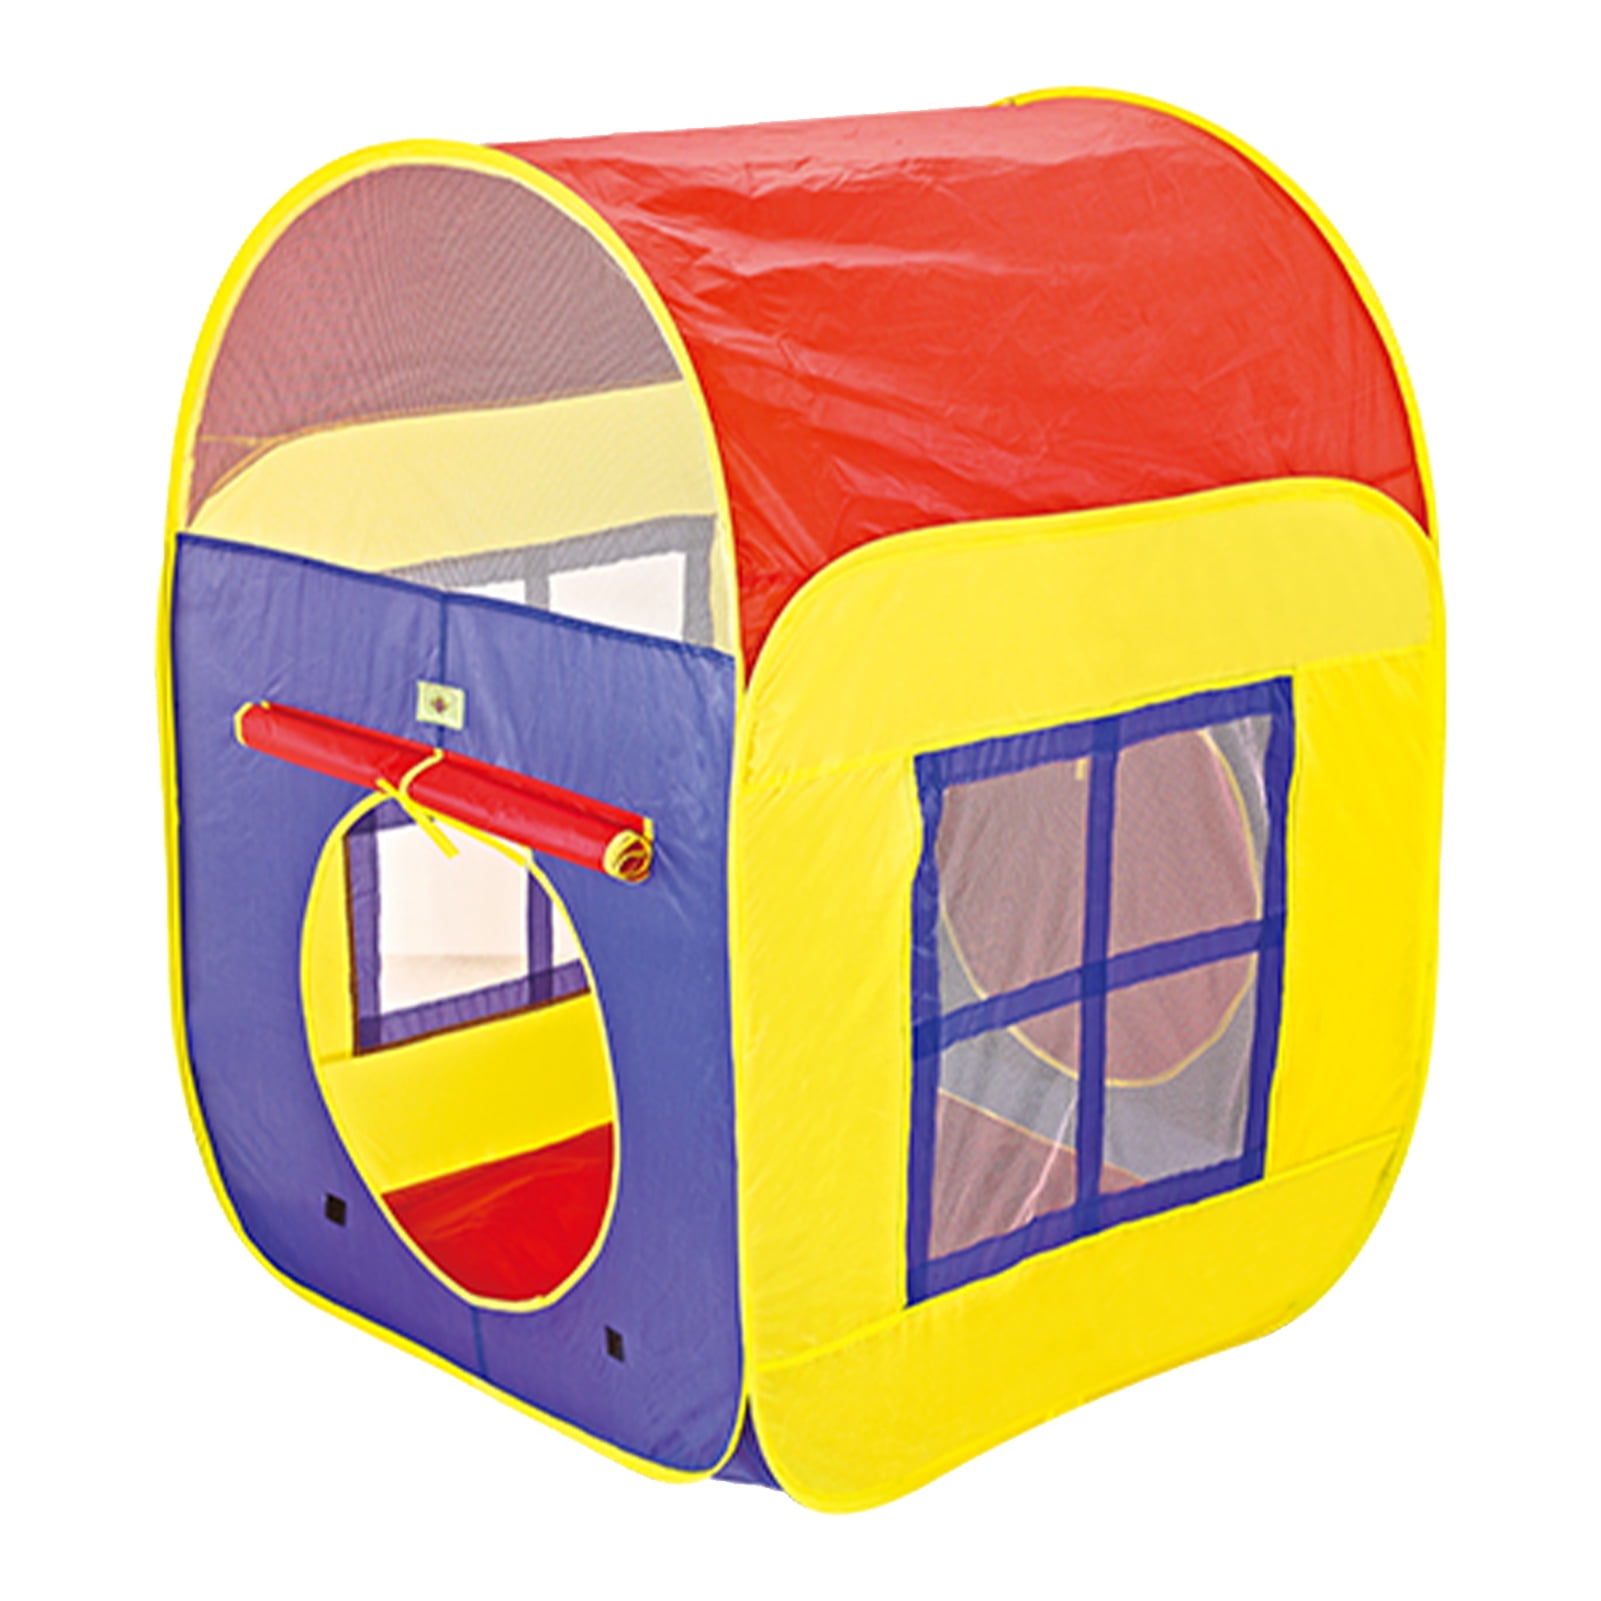 Details about   Colorful Kids Play Tent Outdoor Camping Indoor Children Playhouse Kids Toys Gift 